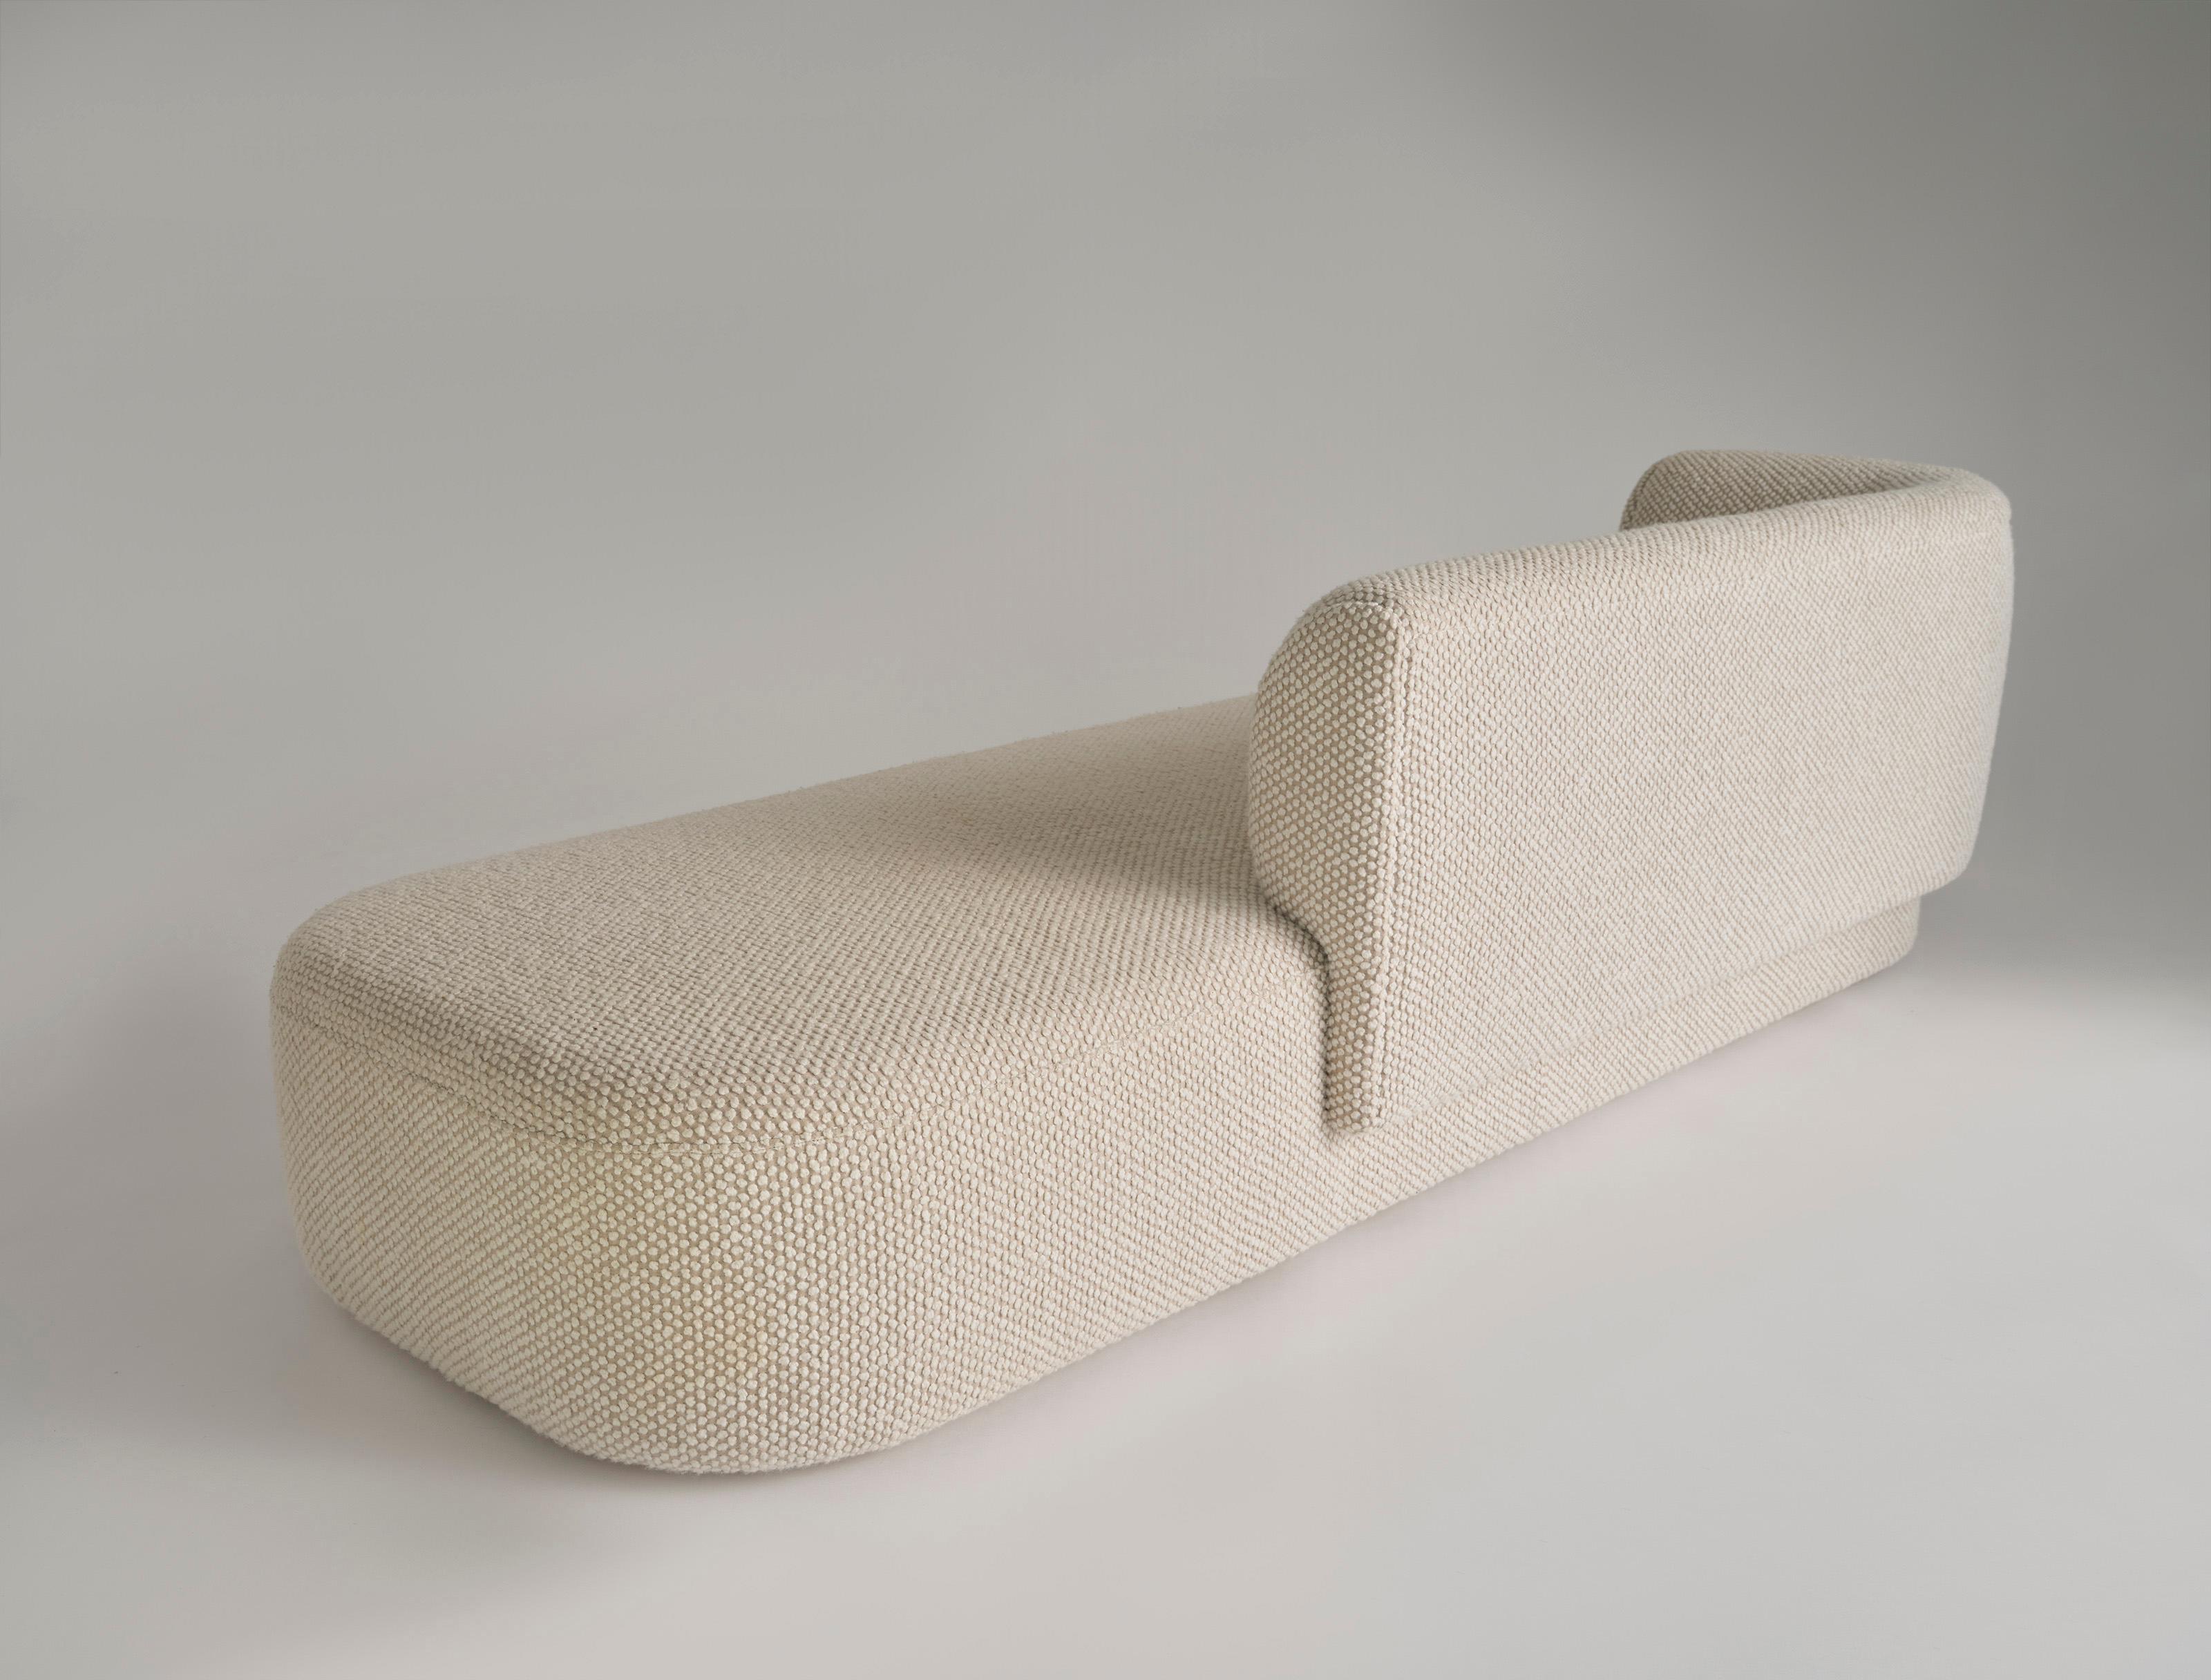 Other Capper Small Chaise Longue by Phase Design